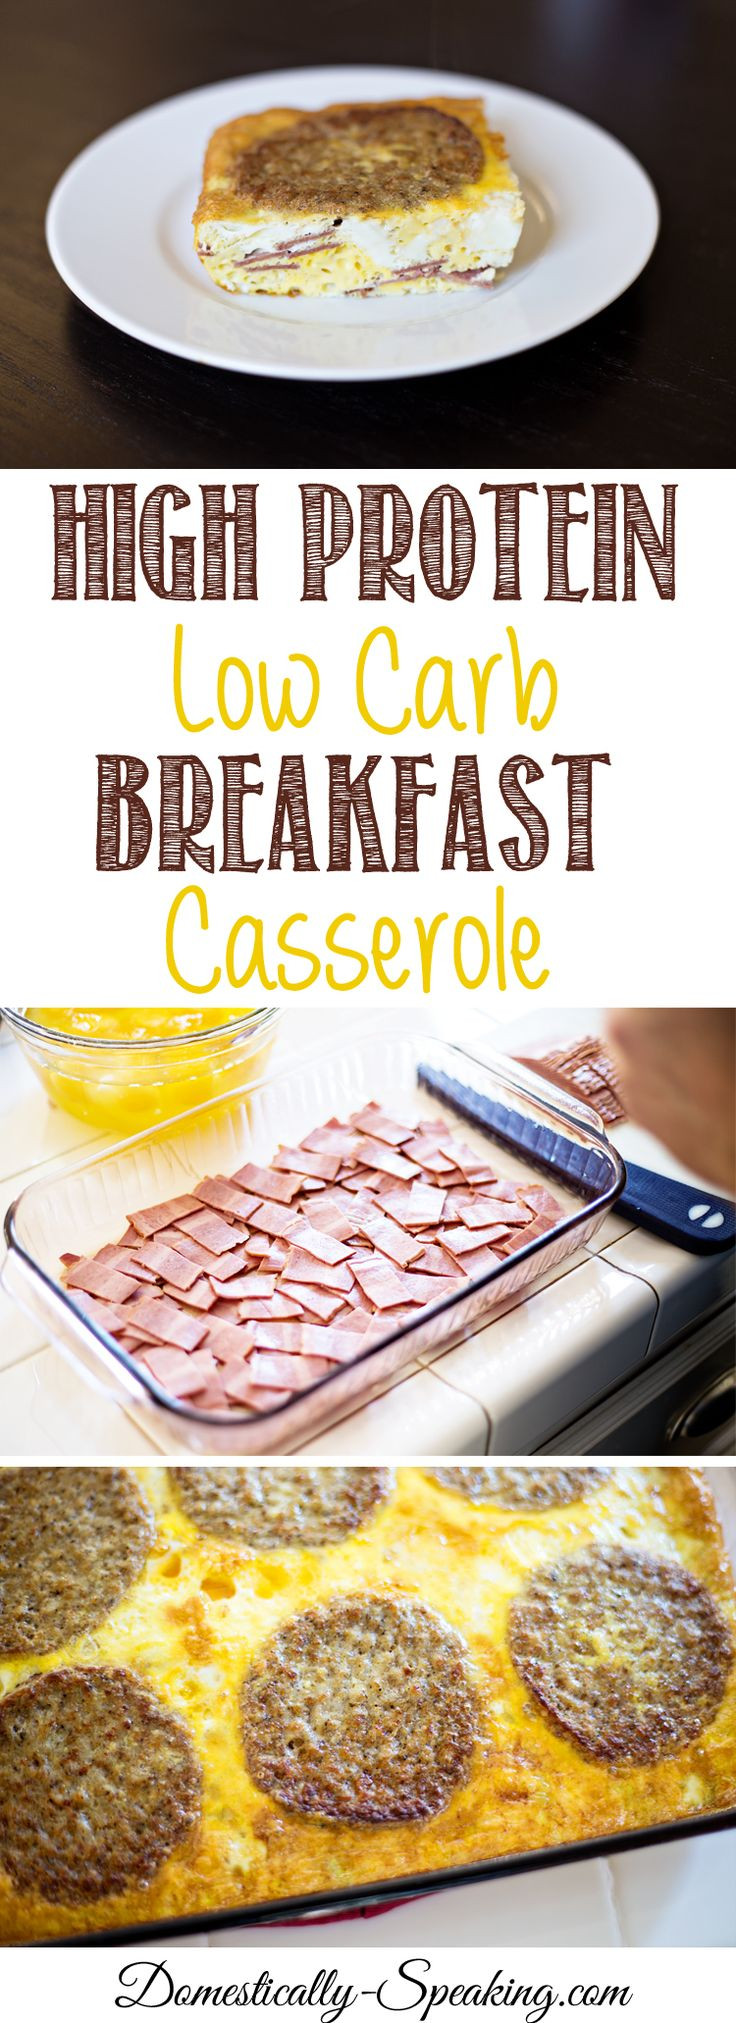 High Protein Low Carb Breakfast Without Eggs
 1000 ideas about High Protein Breakfast on Pinterest